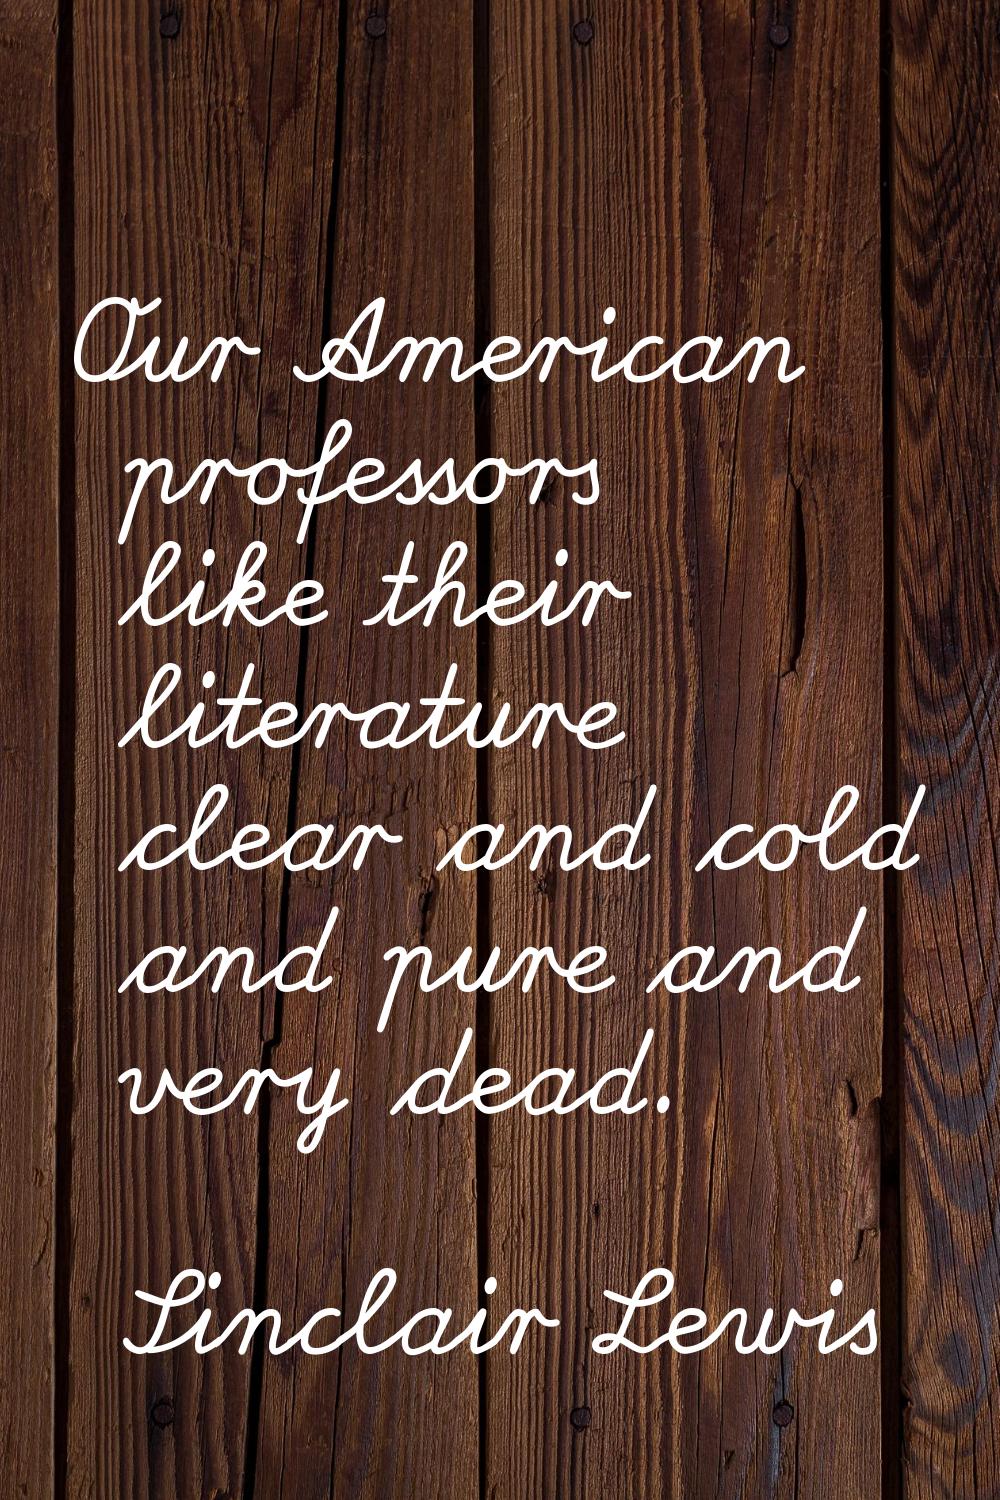 Our American professors like their literature clear and cold and pure and very dead.